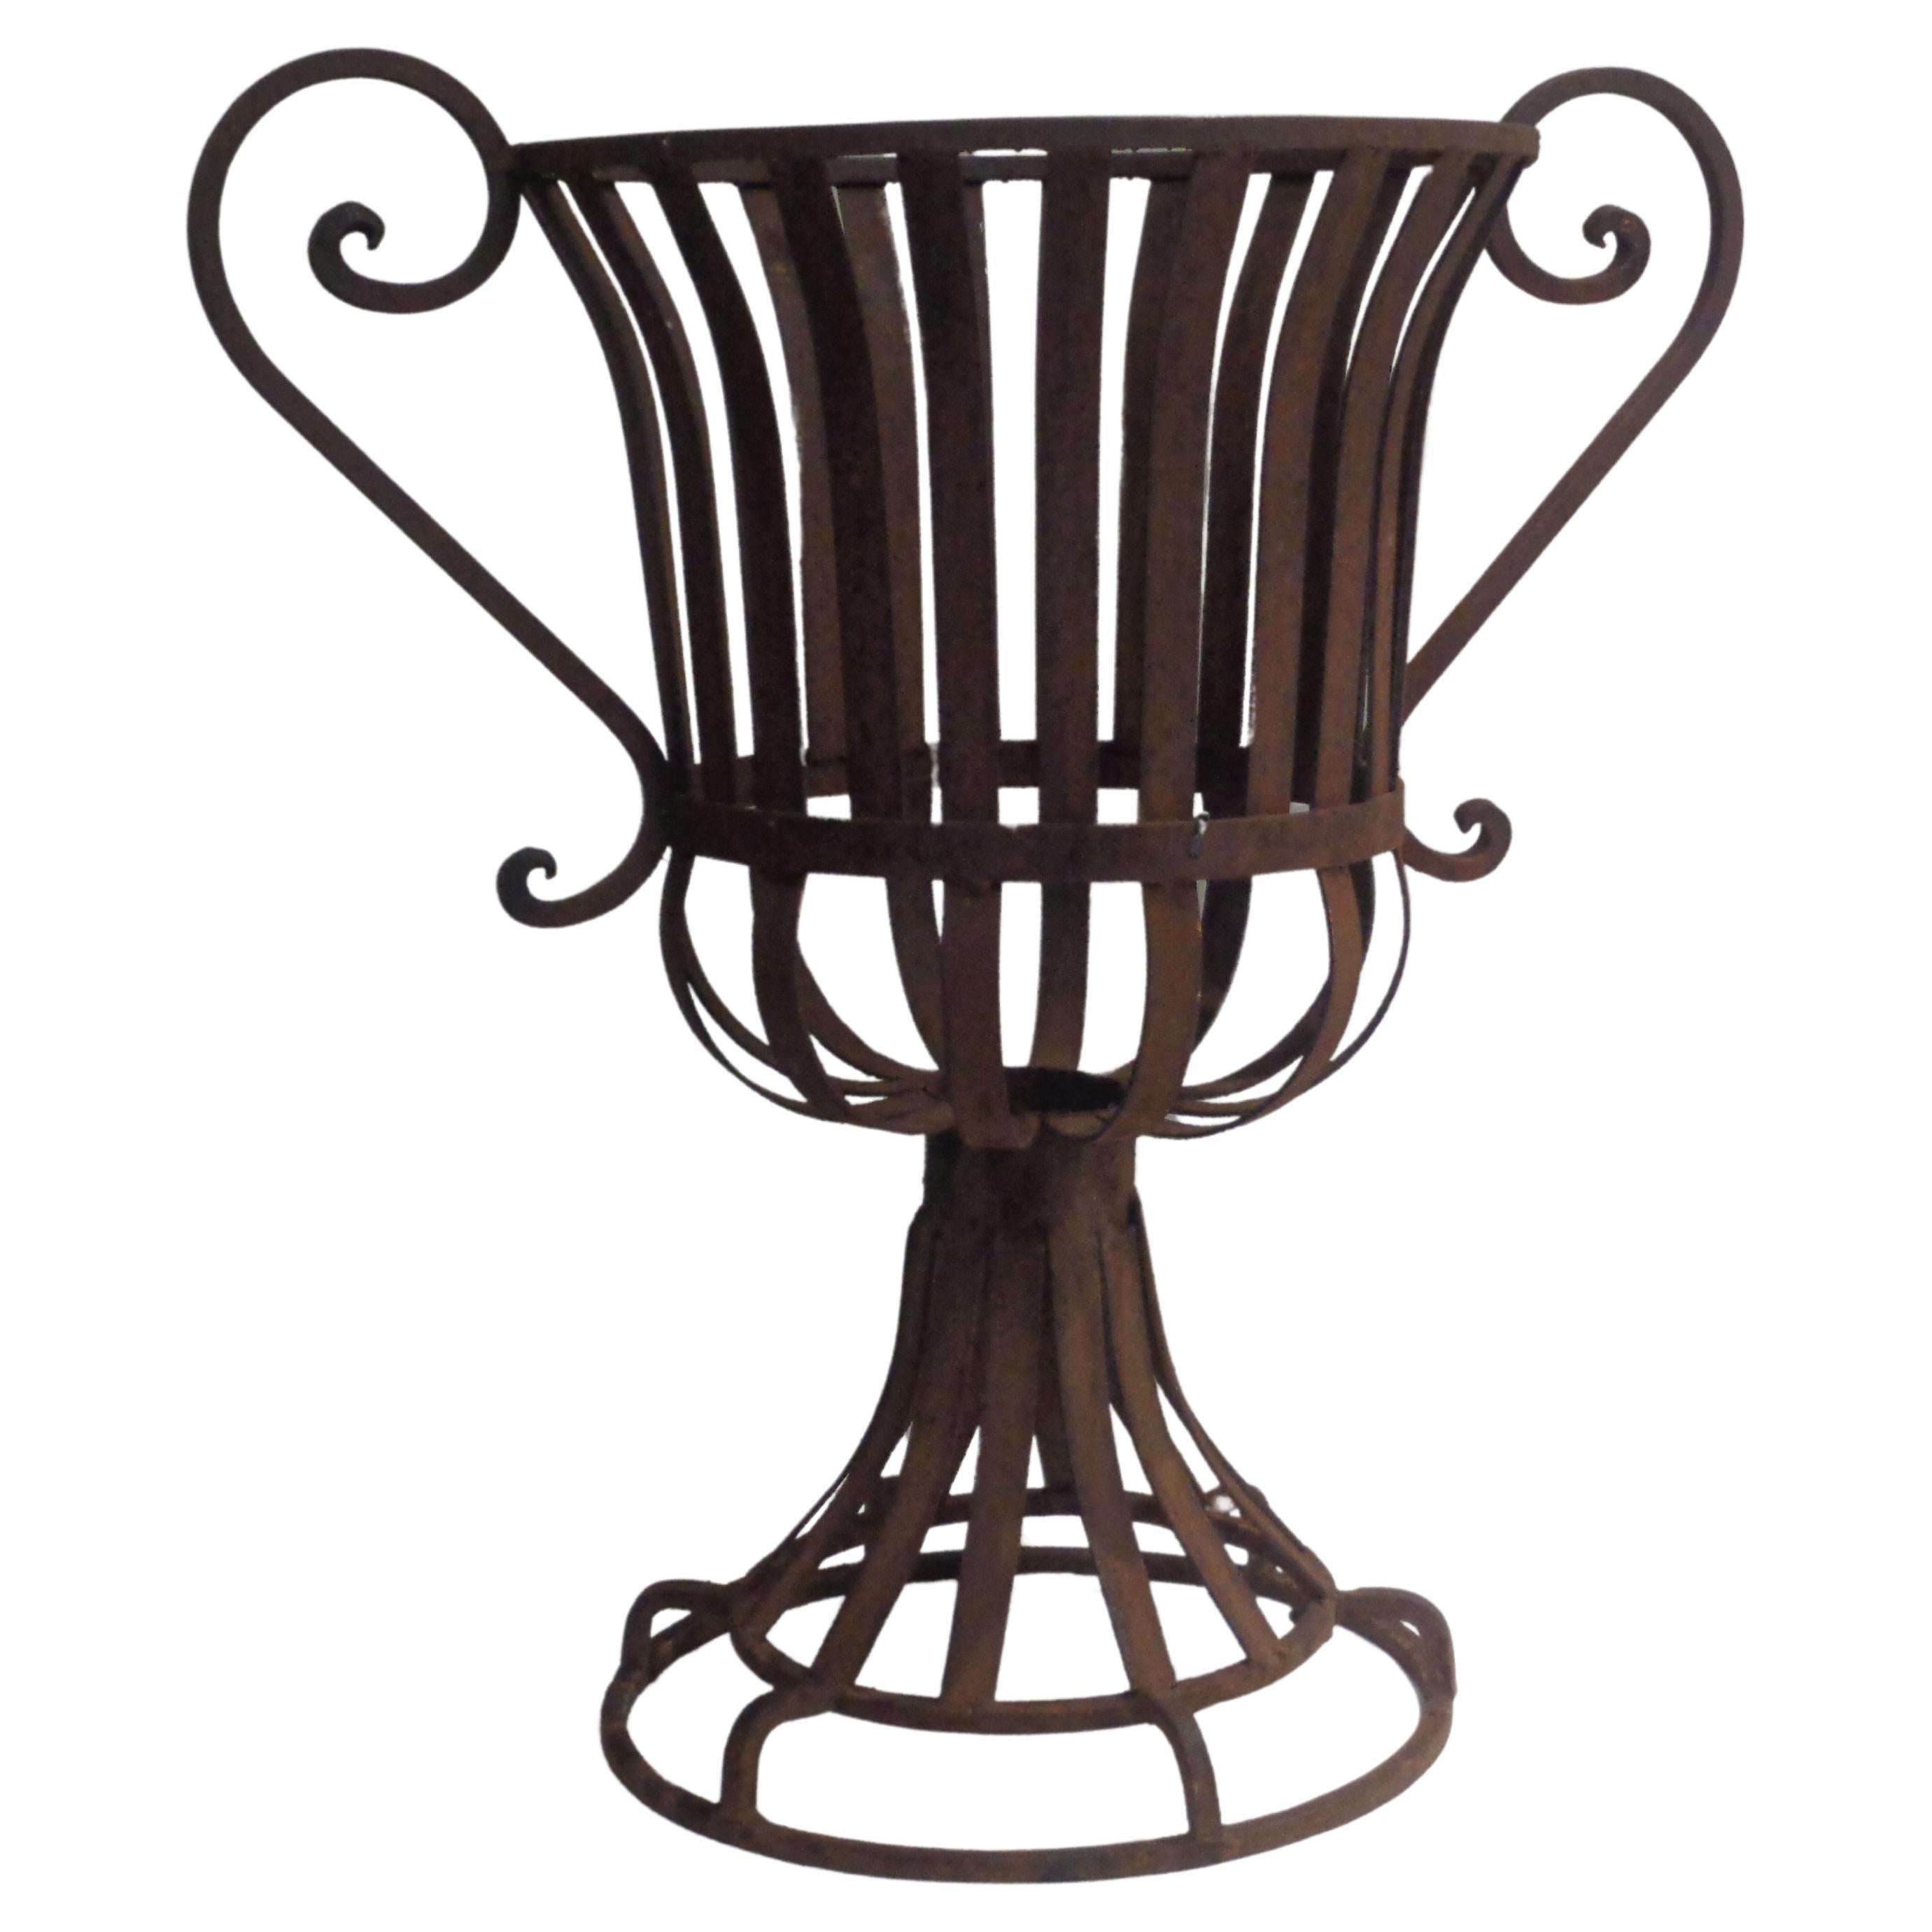 Pair of Neoclassical style strap iron garden urns with large decorative loop handles. Welded construction. Overall nicely aged surface. Small metal tag under one urn - Mexico. Measure 23